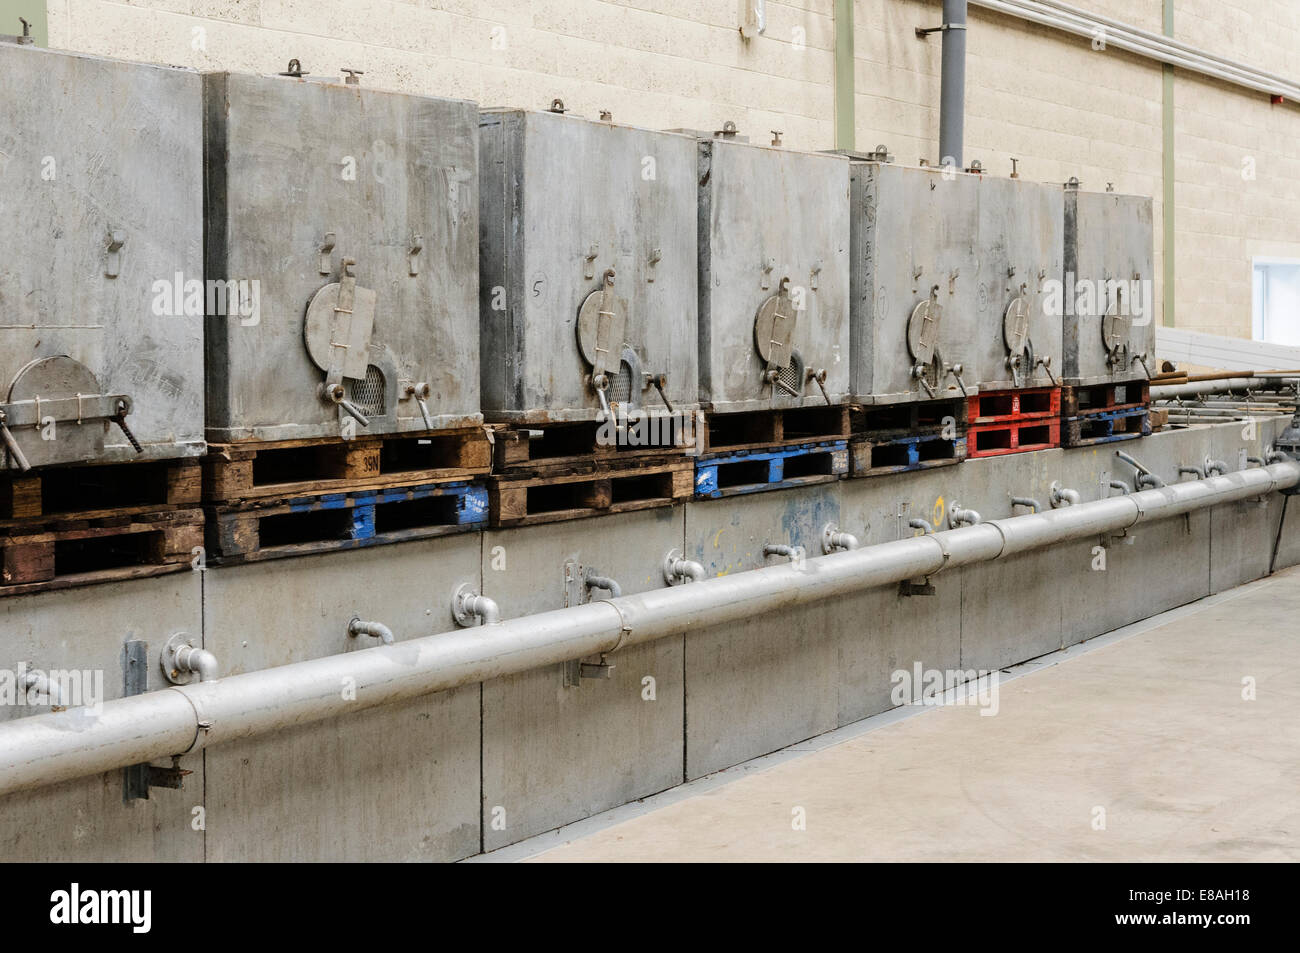 Galvanised tanks for storing and sorting eels. Stock Photo